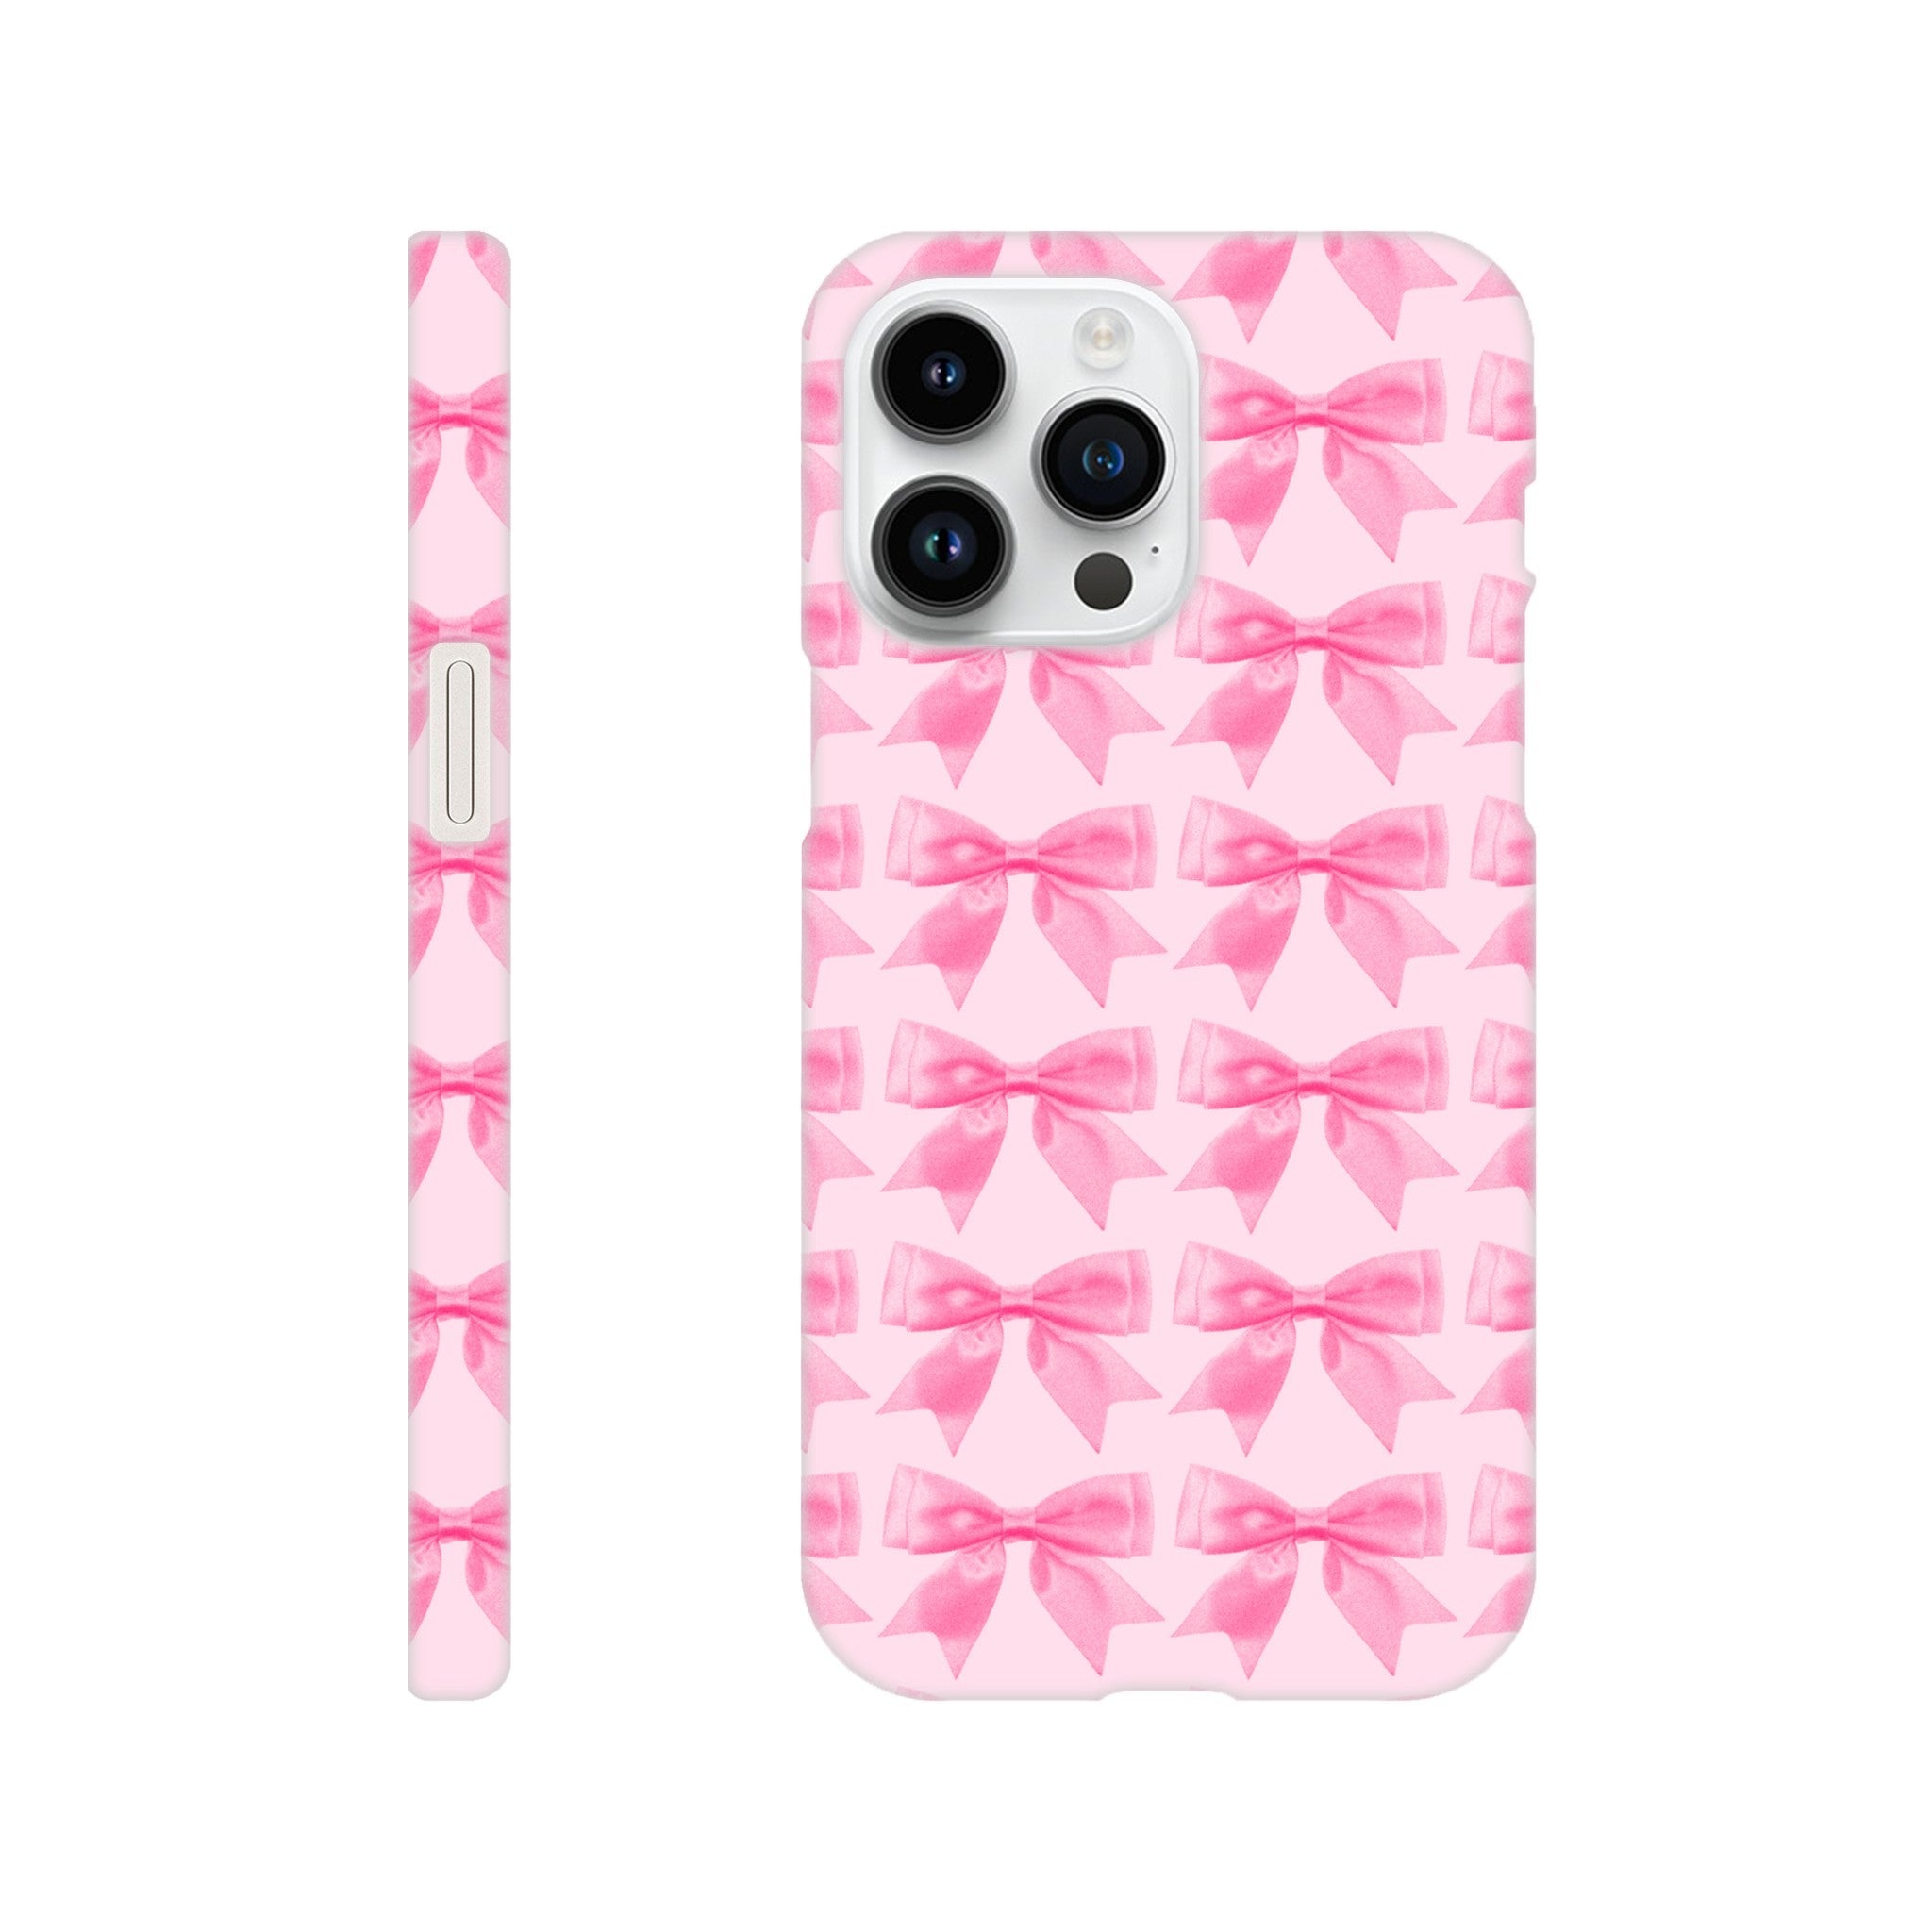 'Put a Bow On It' phone case